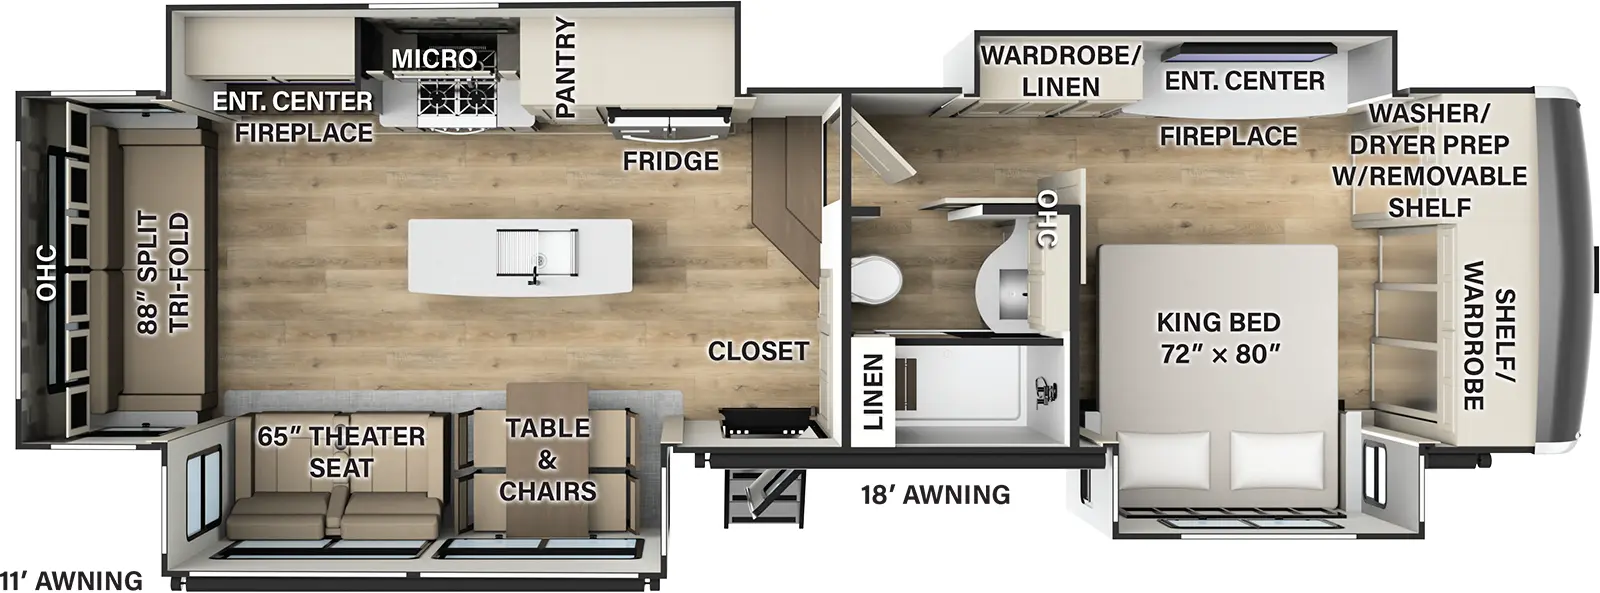 The 380RL has four slideouts and one entry. Exterior features an 11 foot awning and an 18 foot awning. Interior layout front to back: front wardrobe/shelf, washer/dryer prep with removeable shelf, door side king bed slideout, and off-door side slideout with entertainment center, fireplace, and wardrobe/linen closet door side full bathroom with linen closet; steps down to main living area; off-door side slideout with refrigerator, pantry, cooktop, microwave, and entertainment center with fireplace; kitchen island with sink; door side closet along inner wall, entry door, and slideout with table and chairs, and theater seat; rear split tri-fold sofa with overhead cabinet.